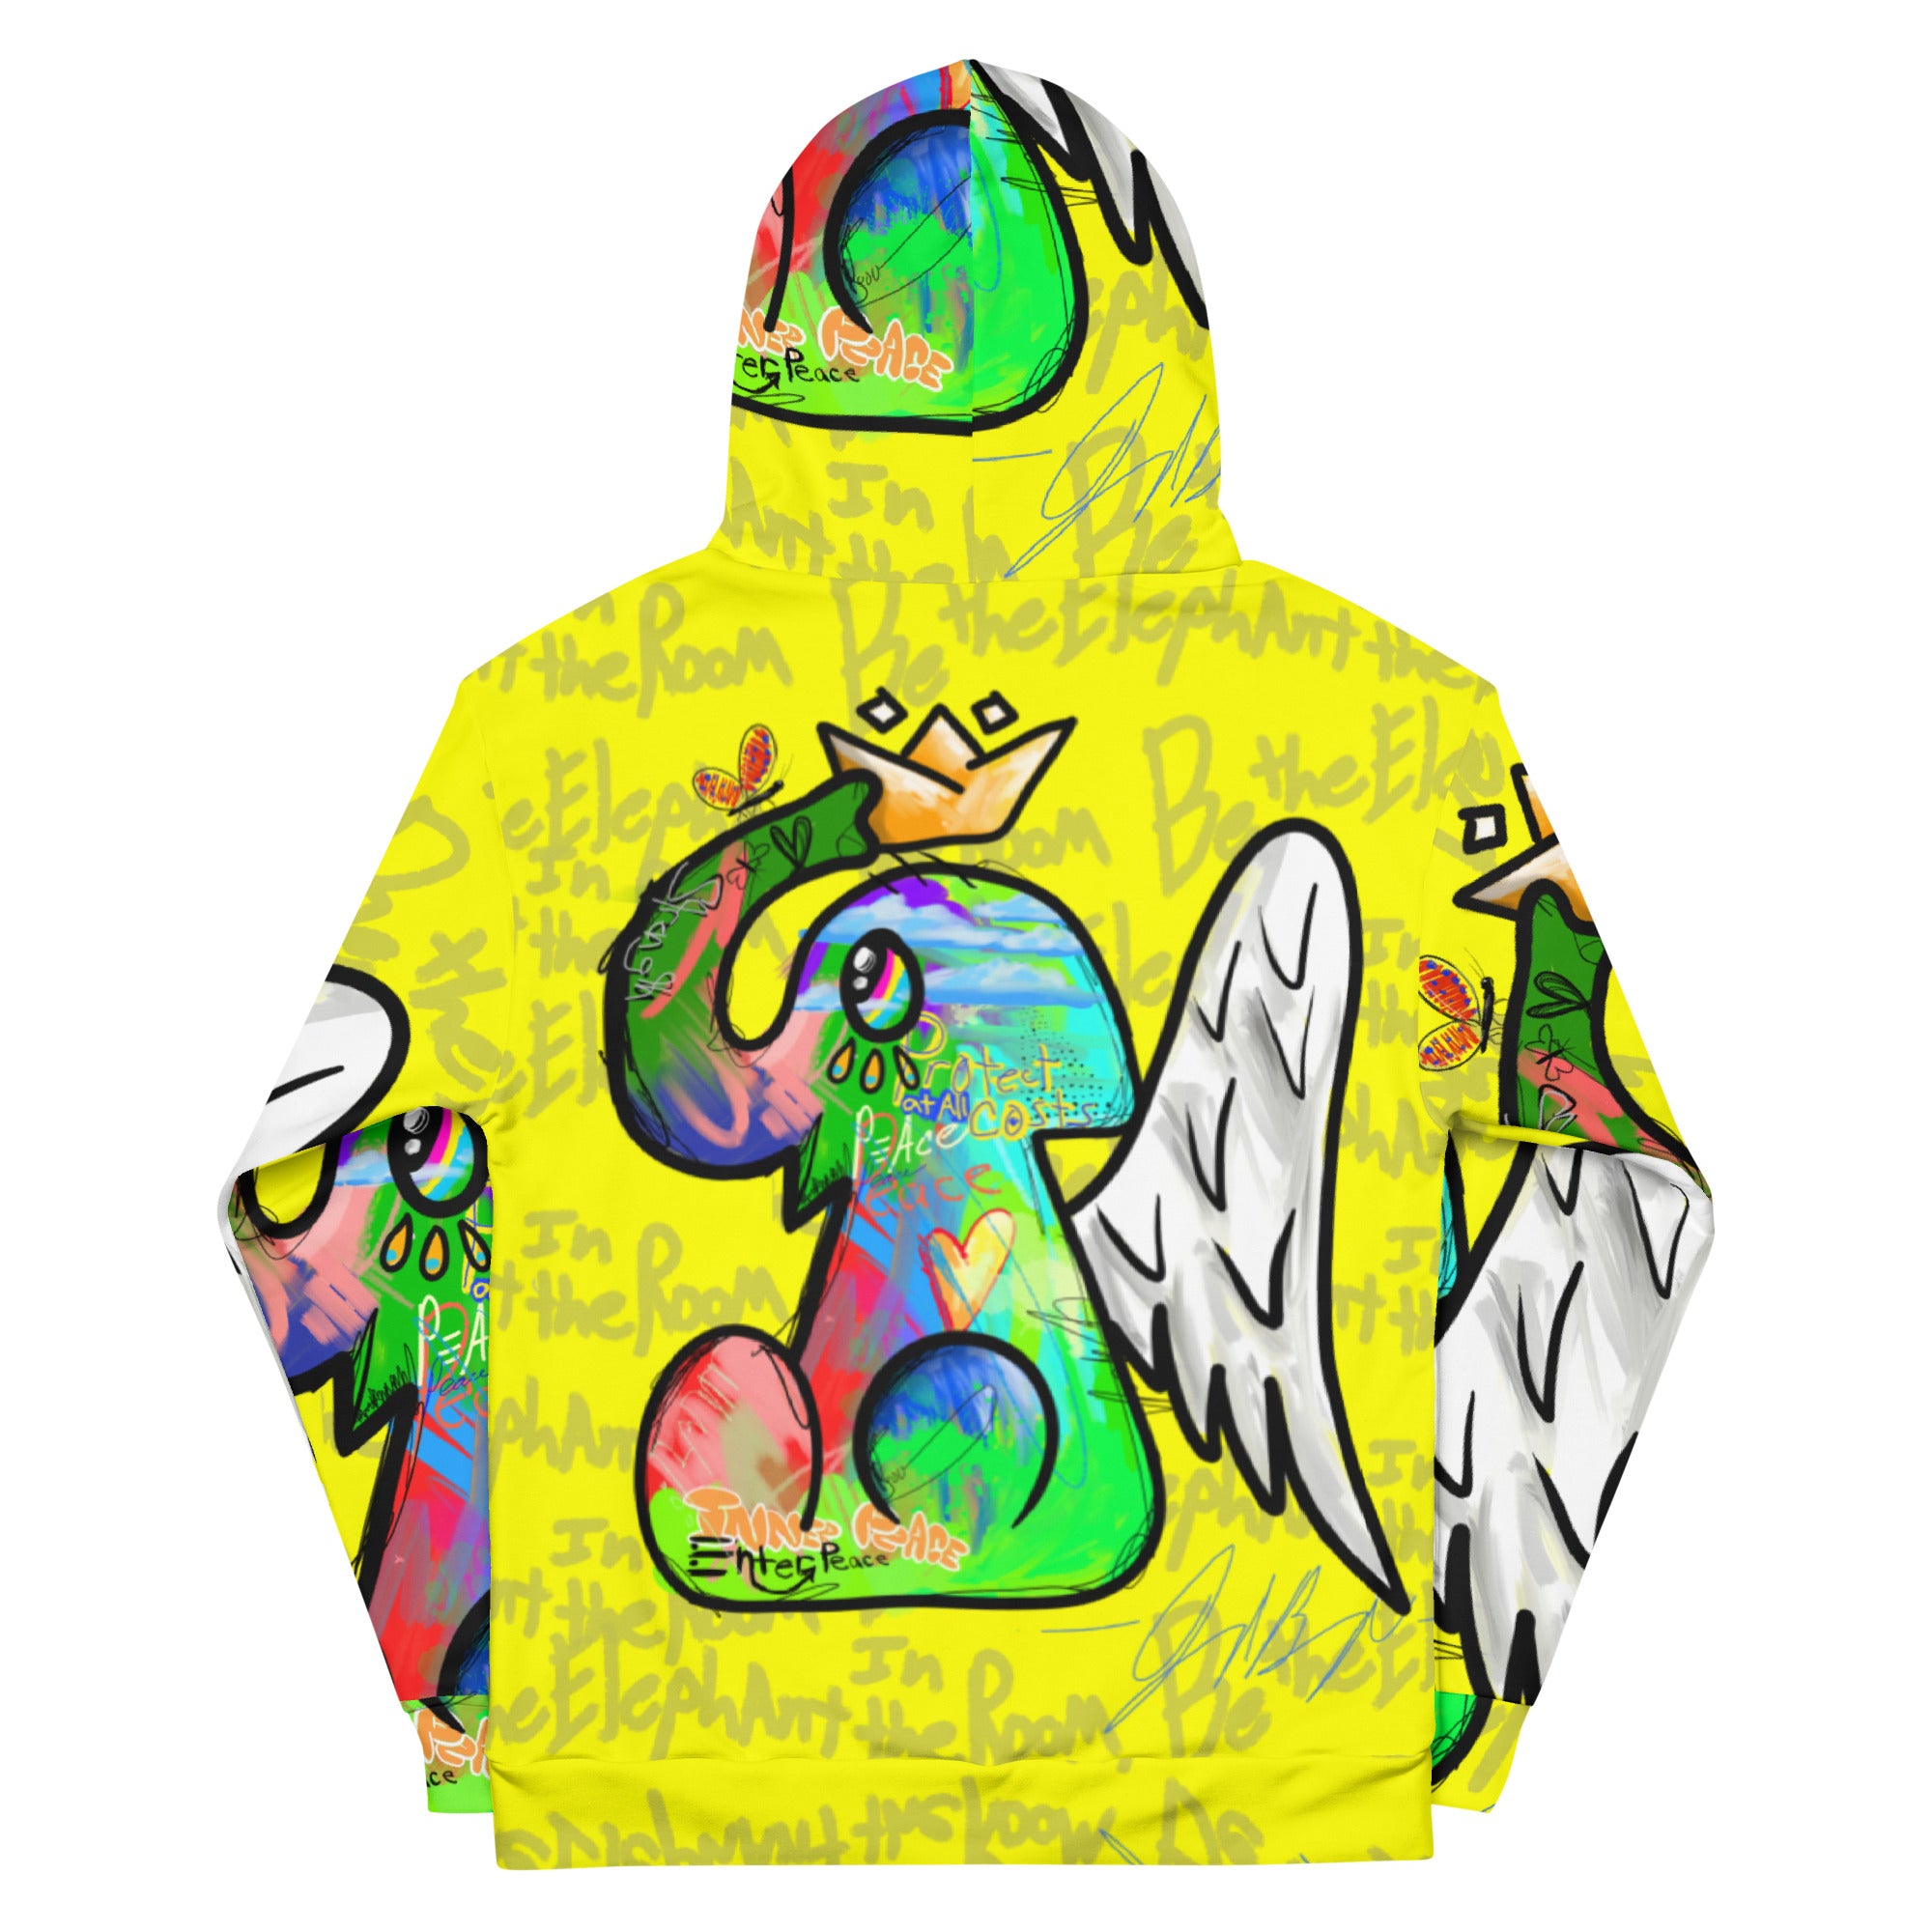 Protect your Peace Hoodie